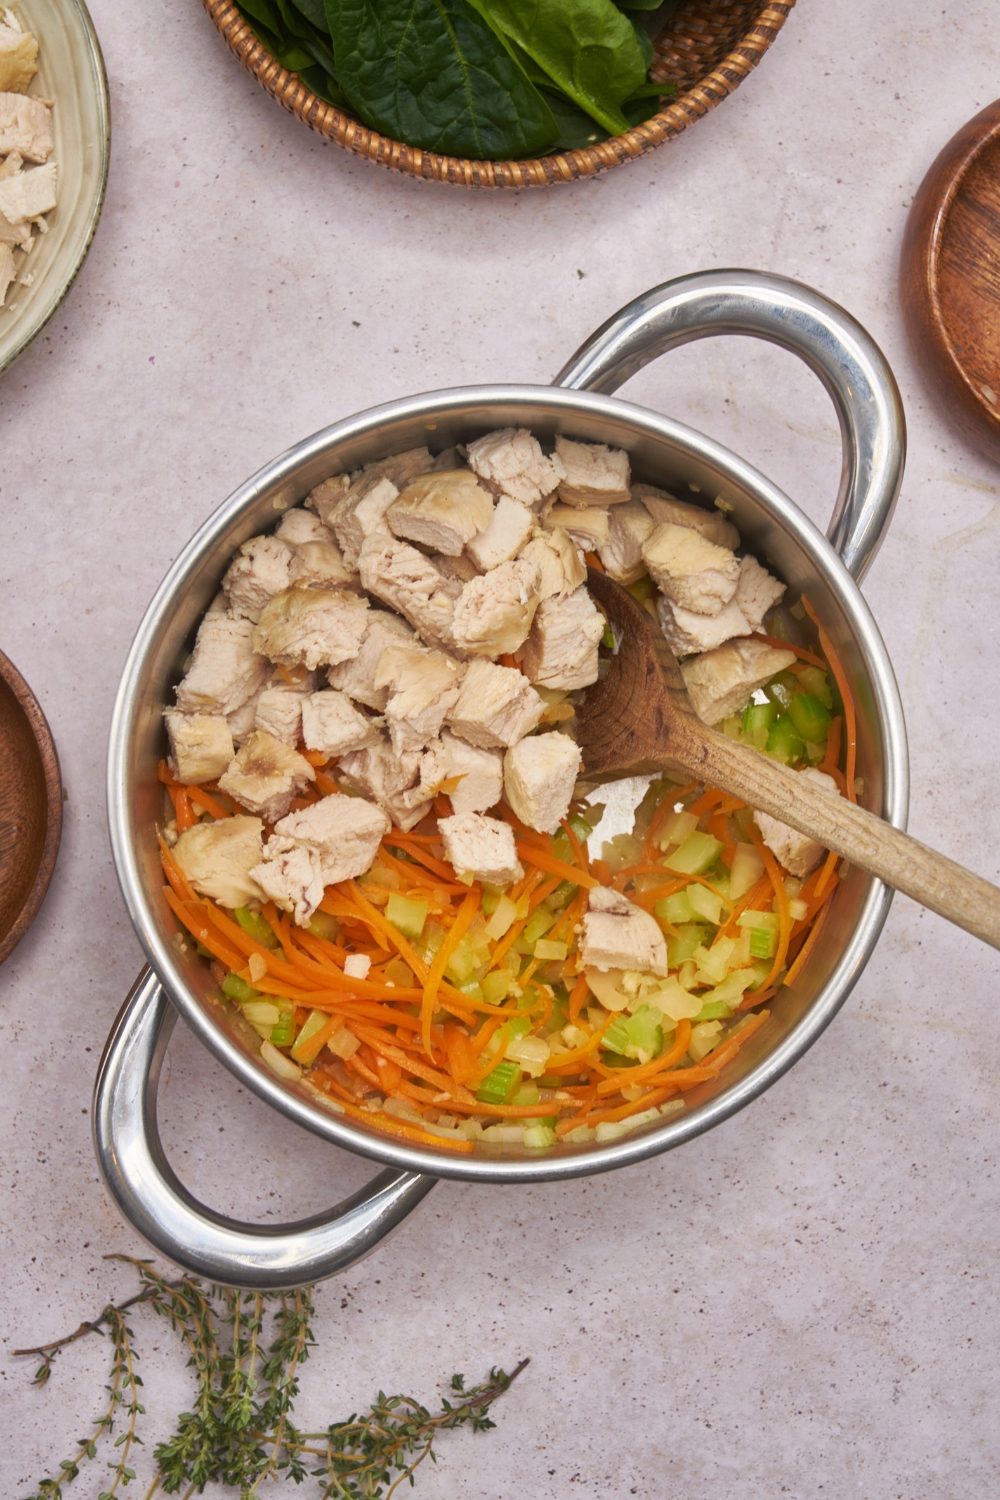 Large pot with diced chicken, shredded carrots, and diced celery simmering in chicken broth.